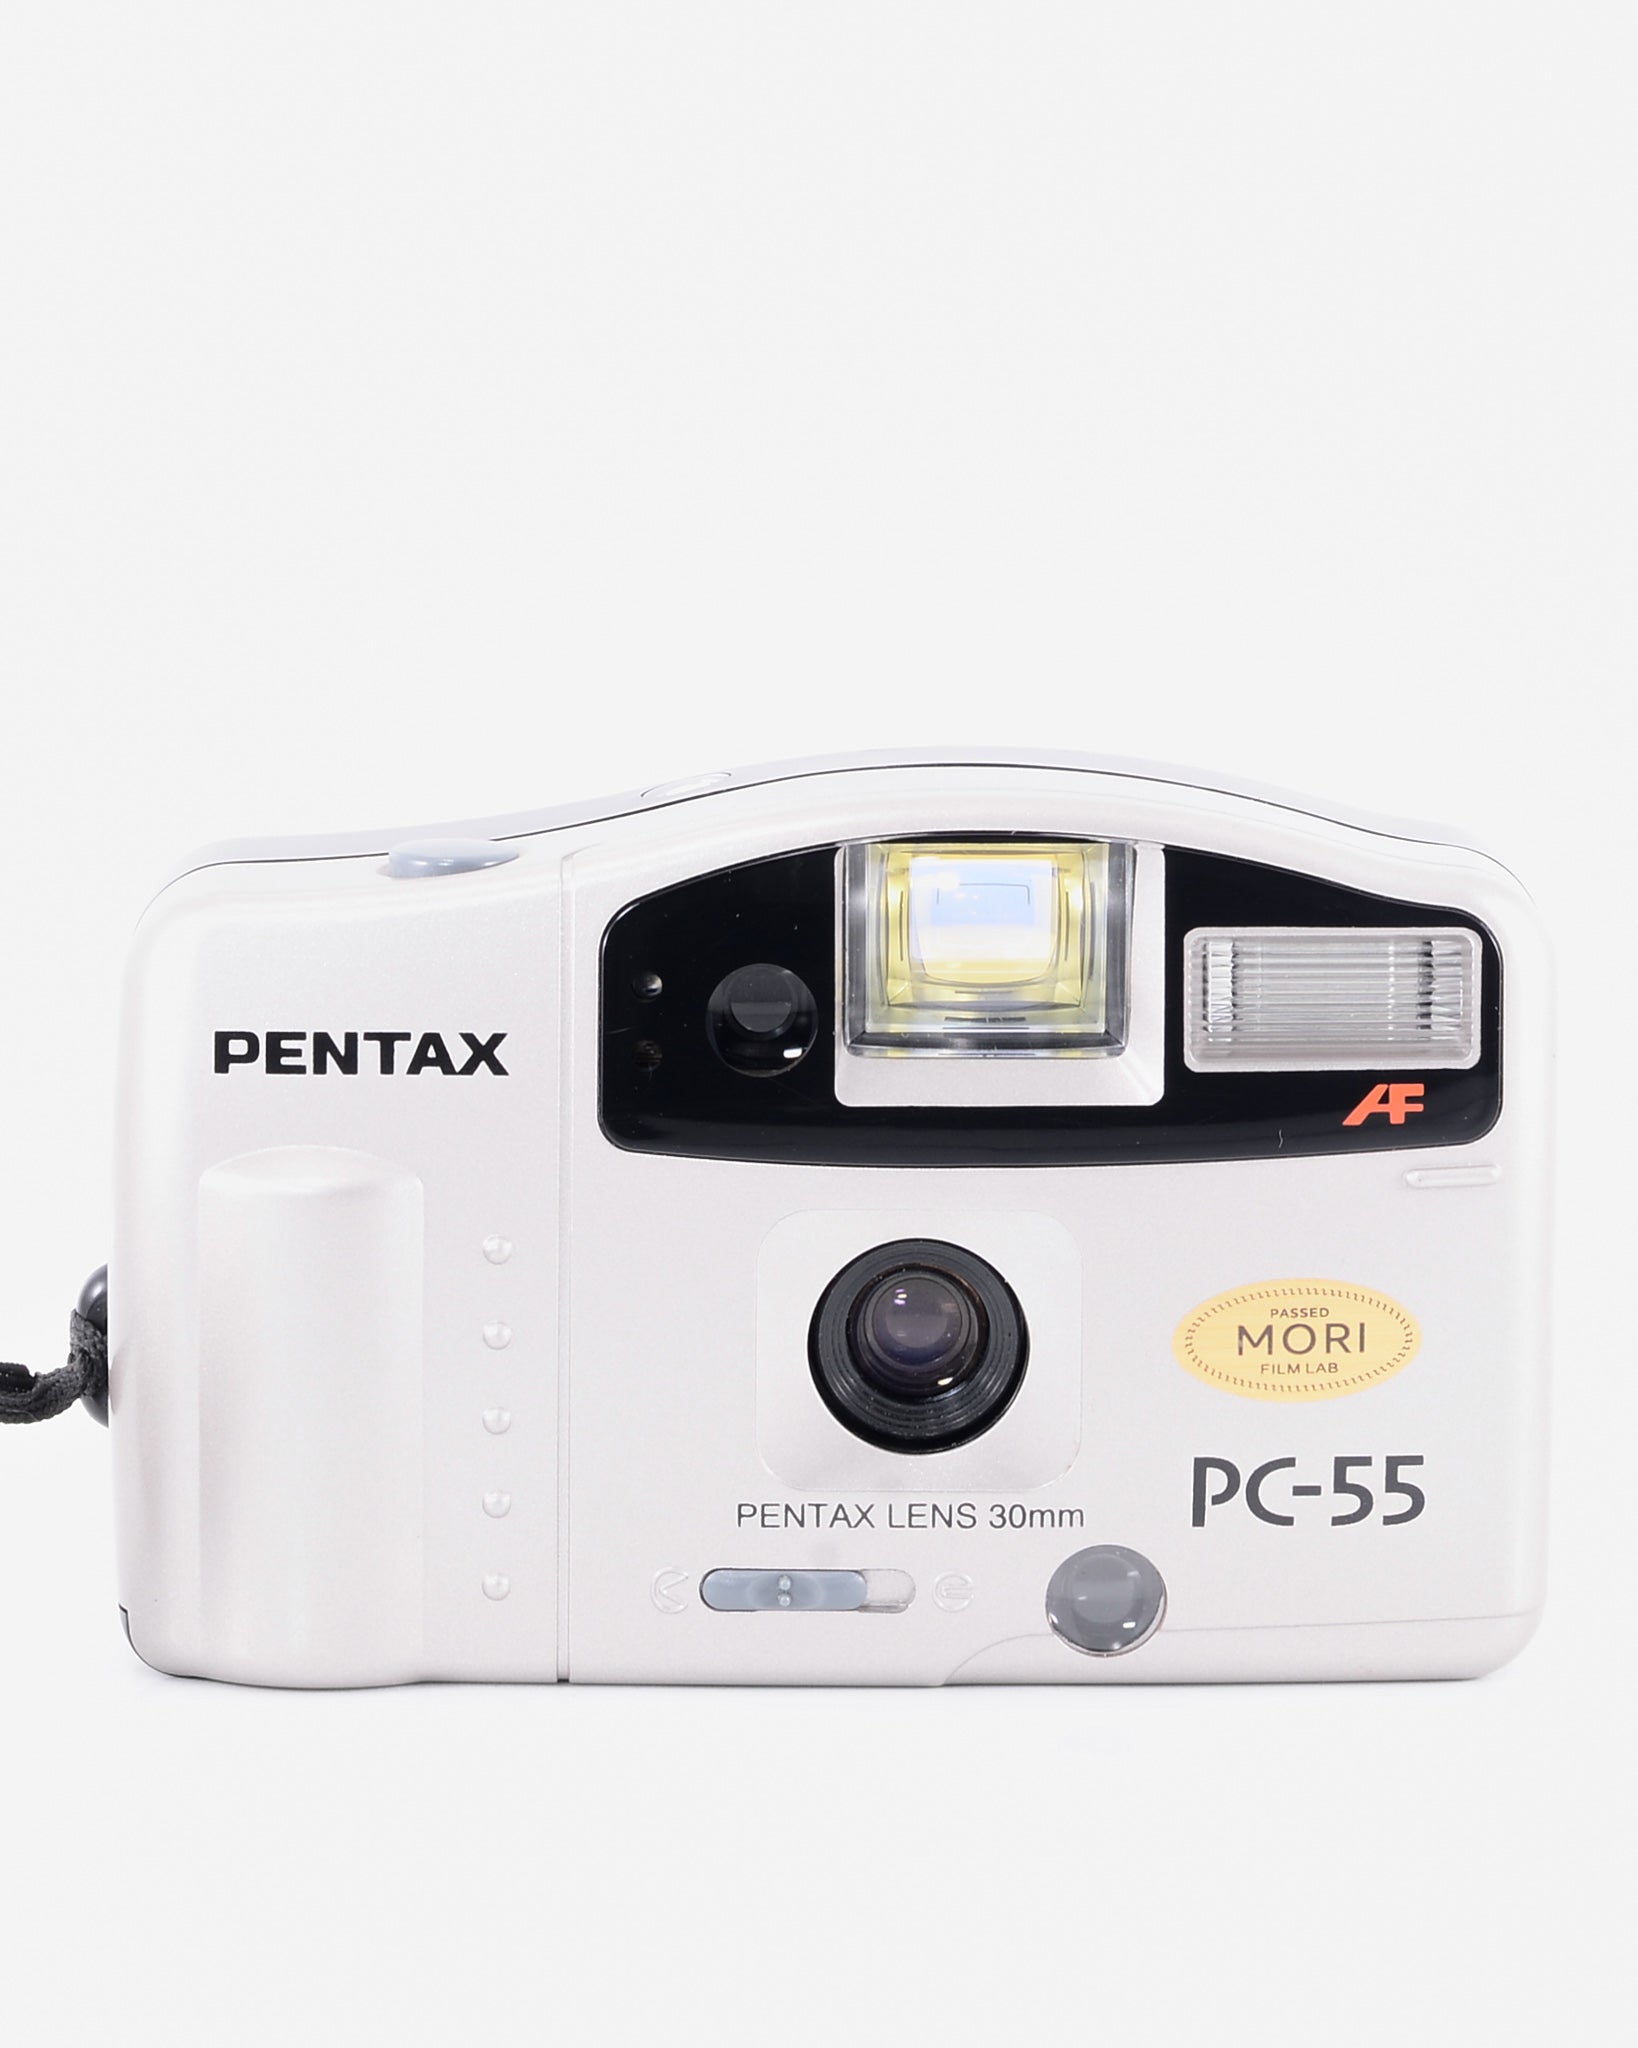 Pentax PC-55 35mm Point & Shoot Film Camera with 30mm Lens